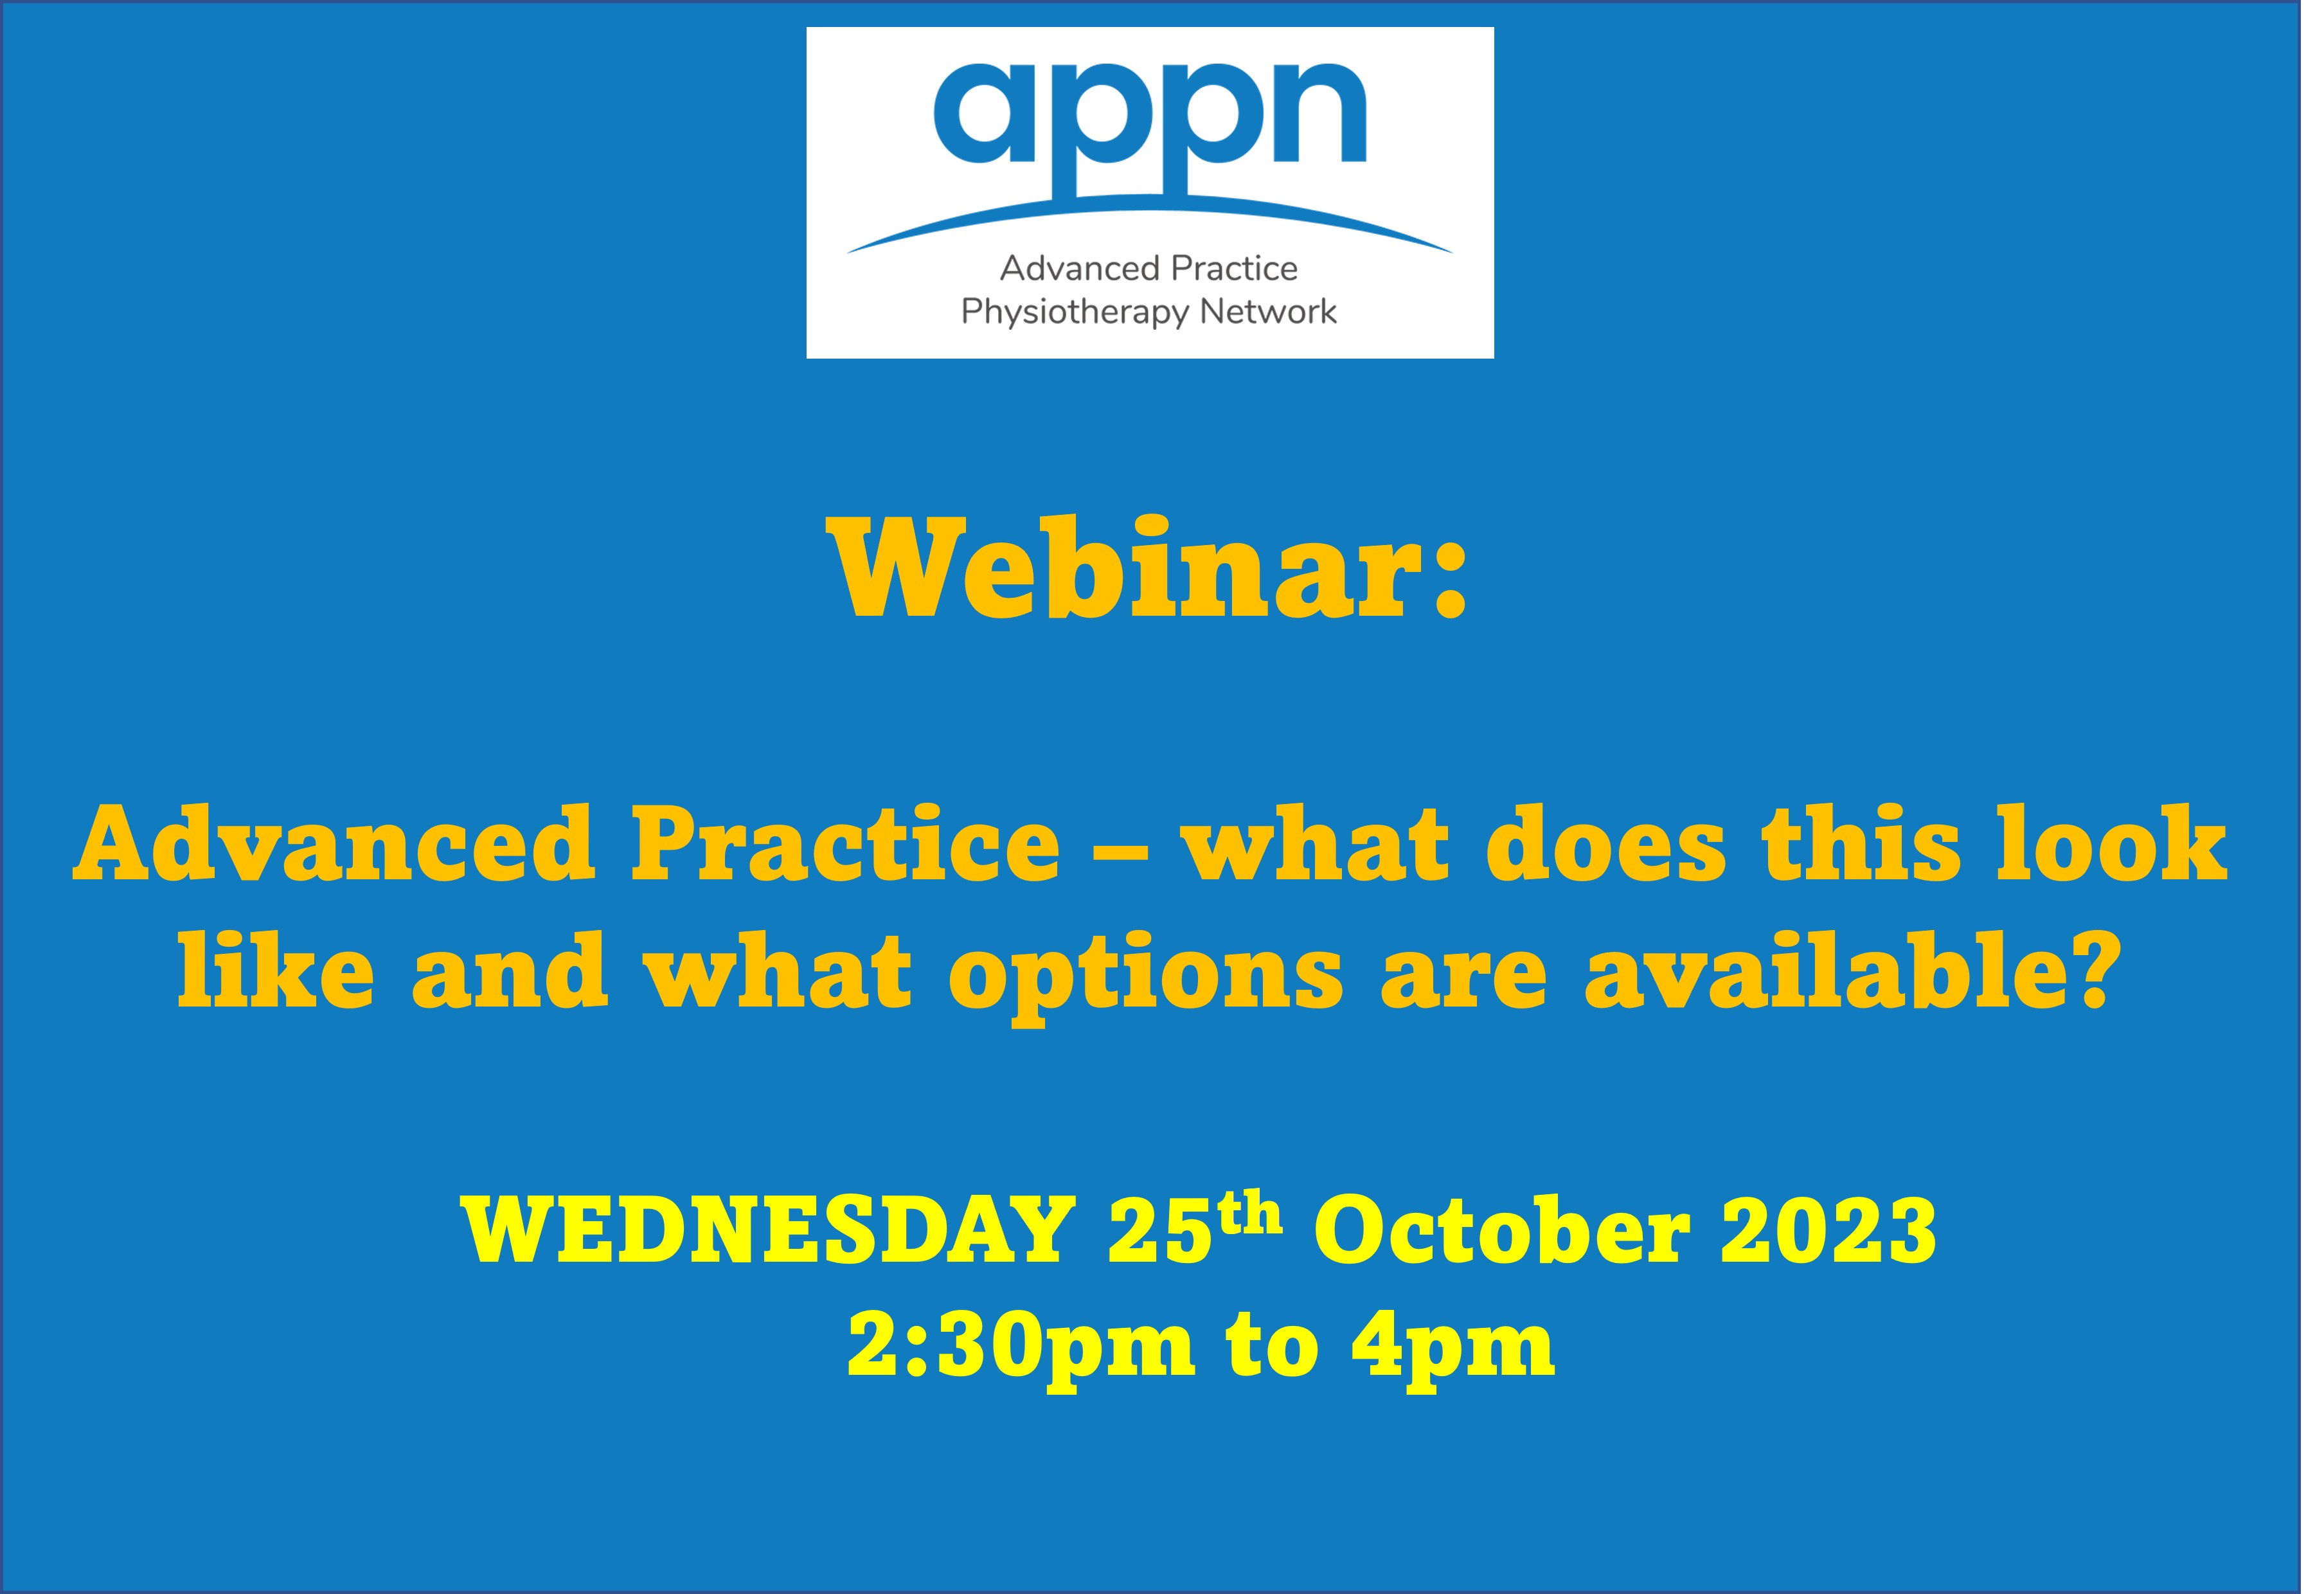 Advanced Practice – what does this look like and what options are available?